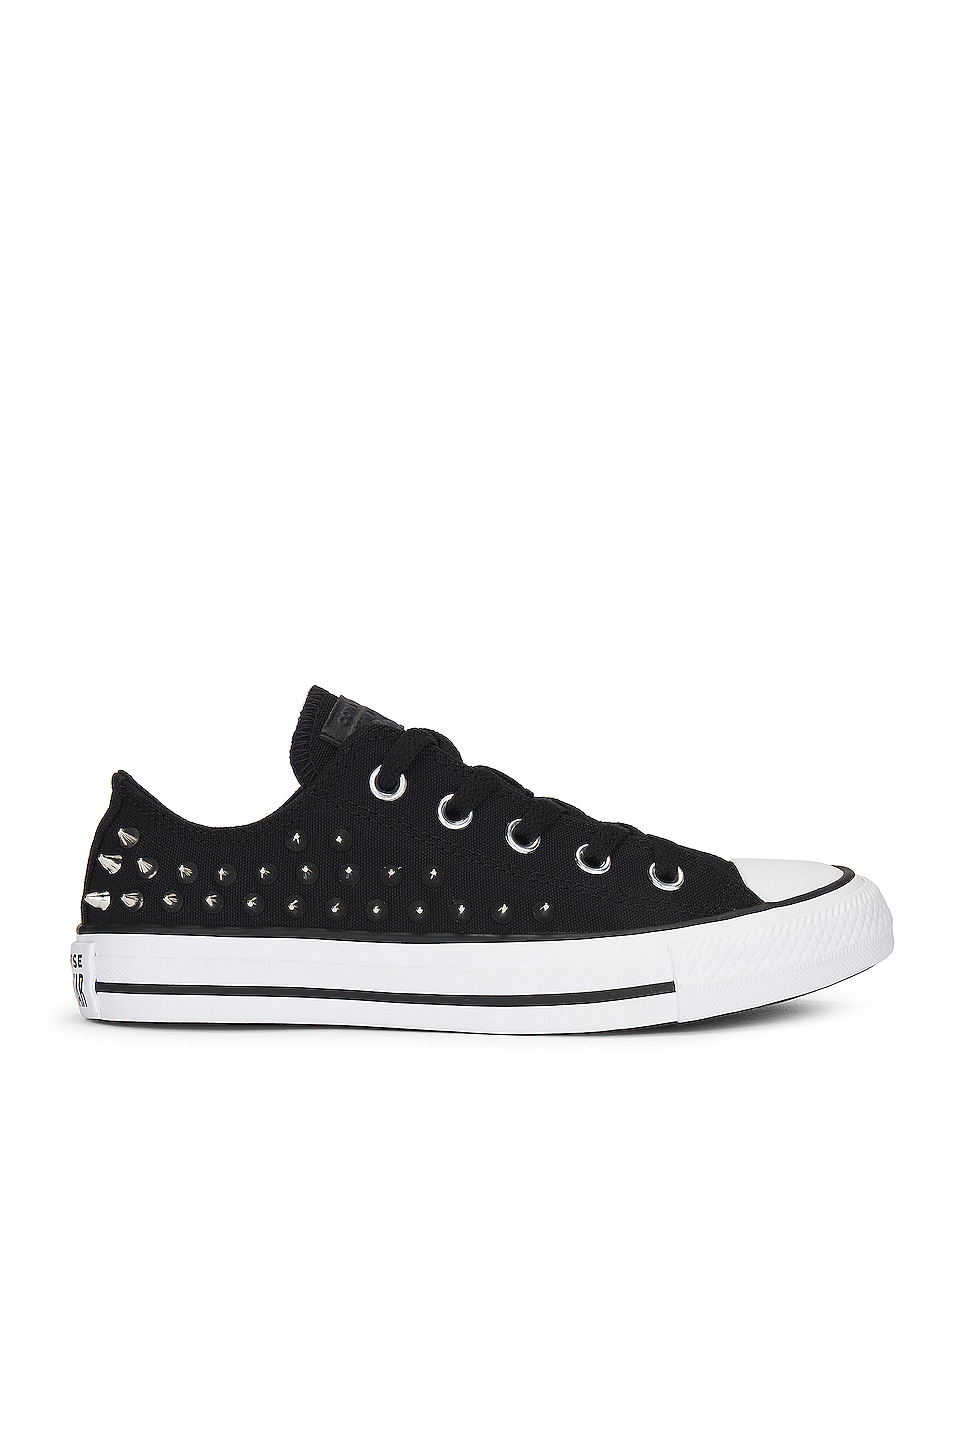 Image 1 of Converse Ctas Chrome Queen in Black & Silver